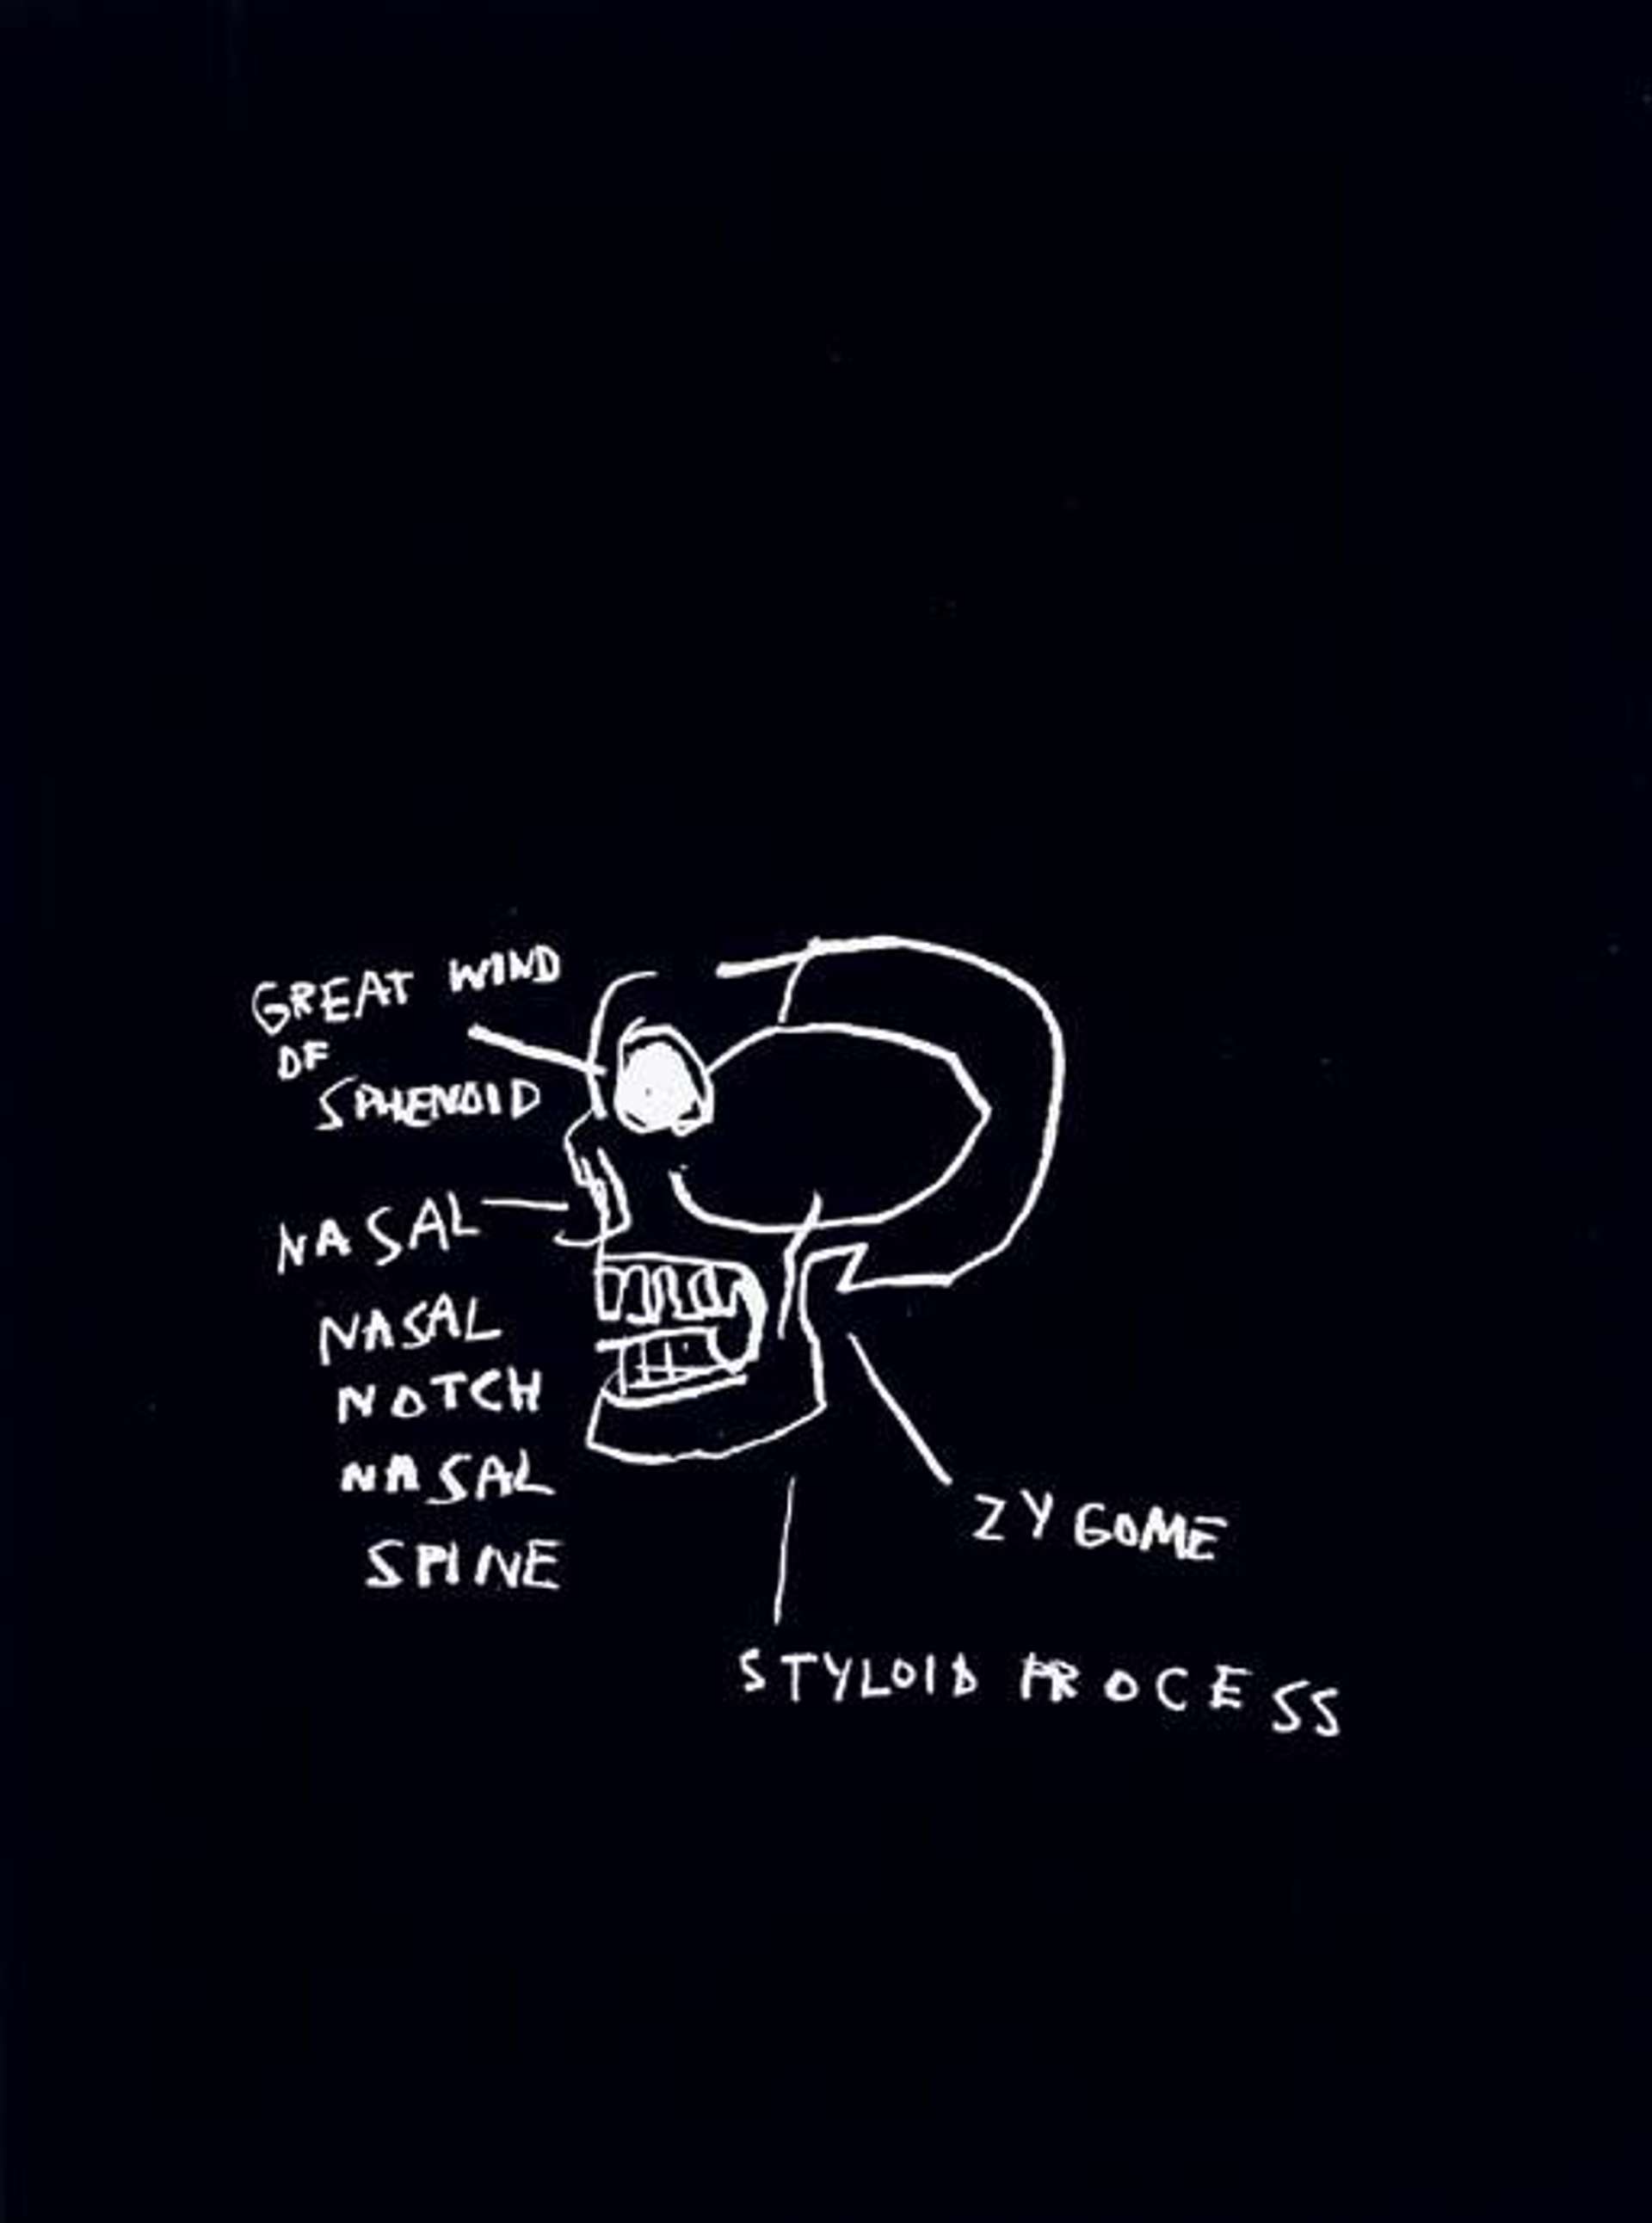 Jean-Michel Basquiat’s Anatomy, Great Wind Of Sphenoid. A black screenprint featuring white anatomical drawings of a human skull and sinuses with descriptive labels.